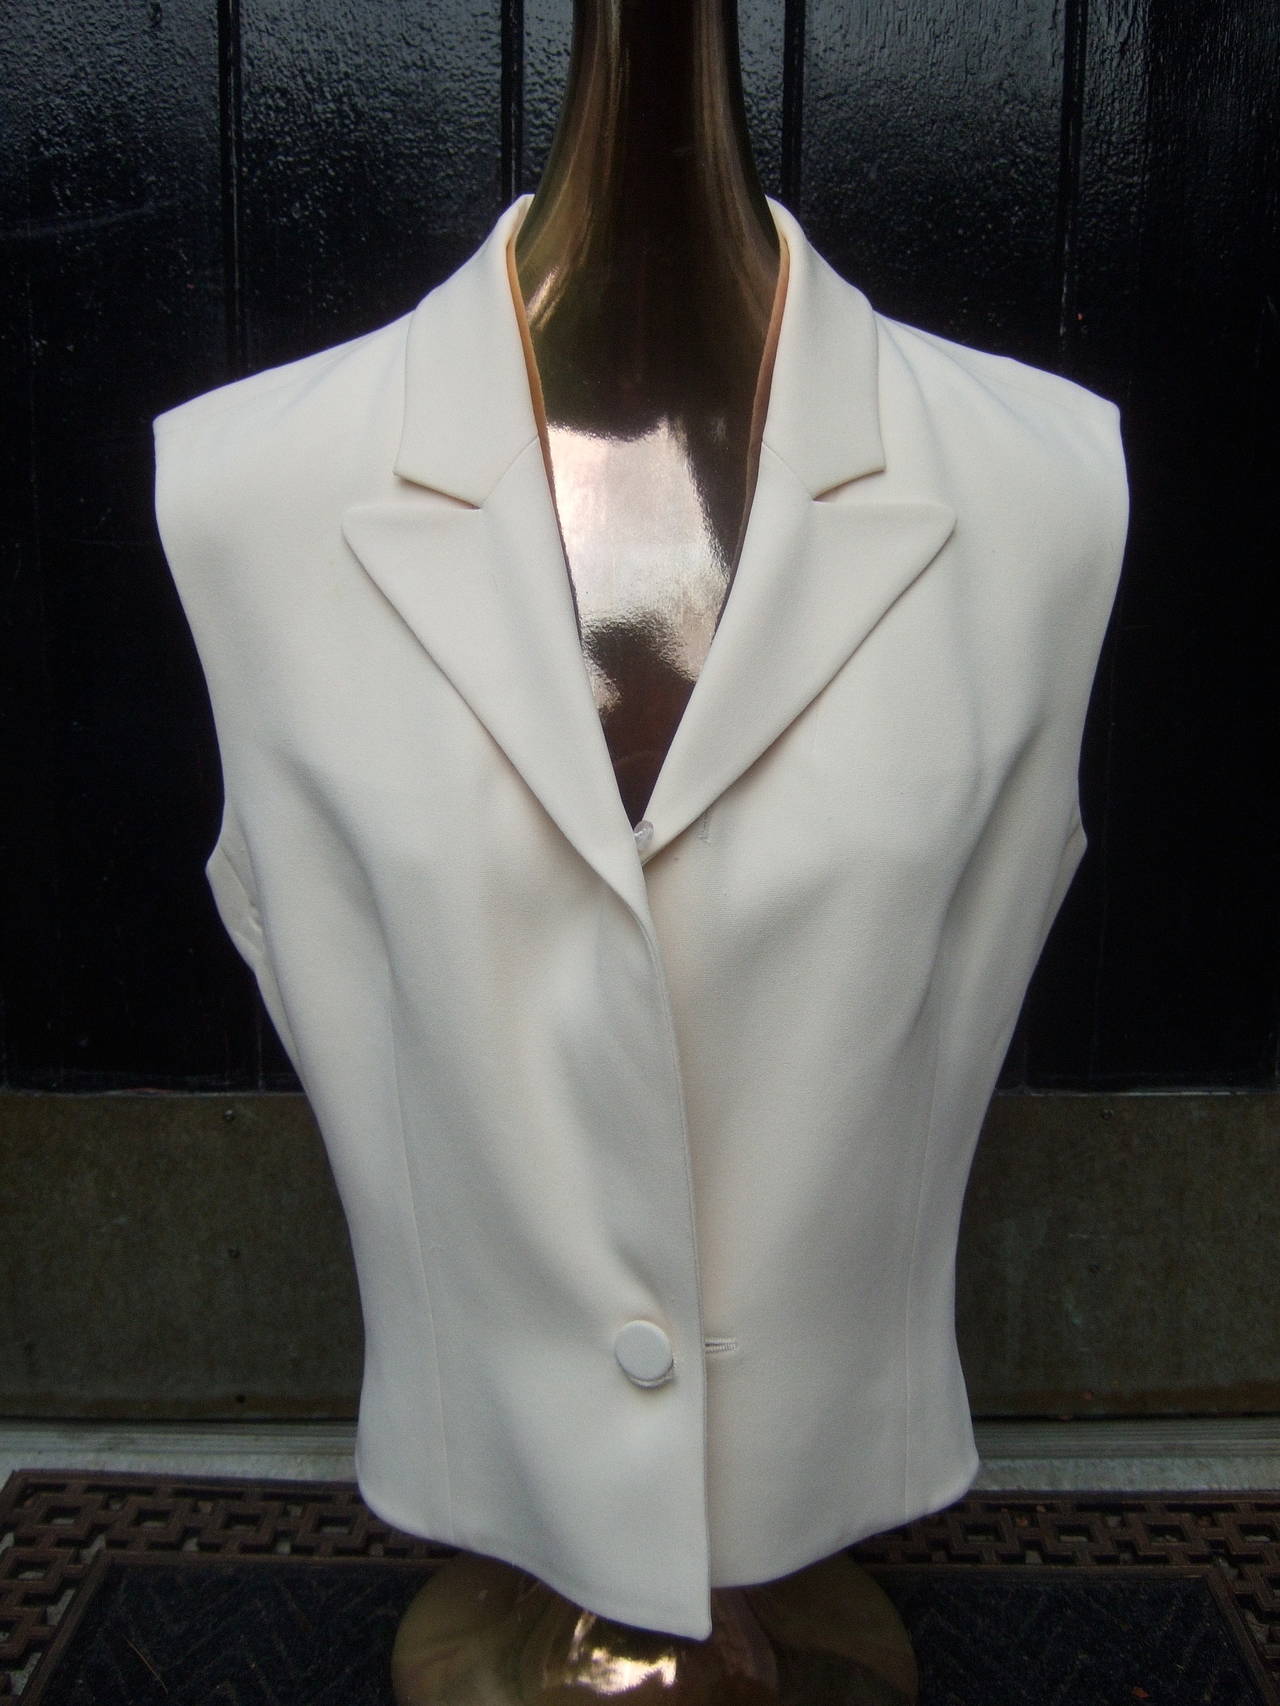 Hermes Paris ivory silk blouse vest  Made in France Size 38
The luxurious blouse is designed with double faced silk
The elegant blouse / vest secures with a single matching cloth 
covered button

The stylish silk blouse may be worn individually